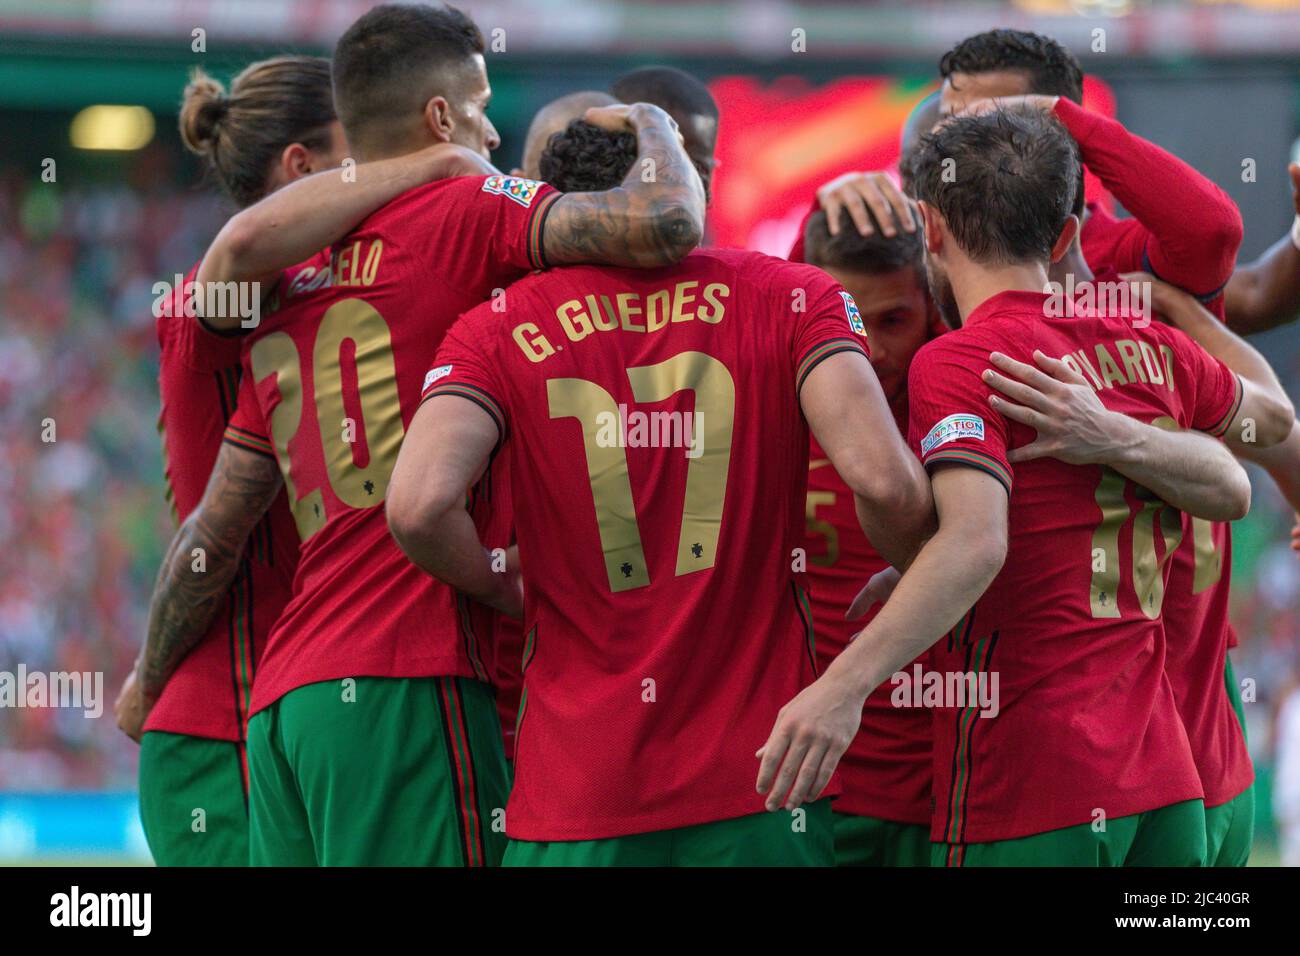 June 09, 2022. Lisbon, Portugal. Portugal's and Valencia midfielder Goncalo Guedes (17) celebrating after scoring a goal with teammates during the UEFA Nations League Final Tournament between Portugal and Czechia Credit: Alexandre de Sousa/Alamy Live News Stock Photo